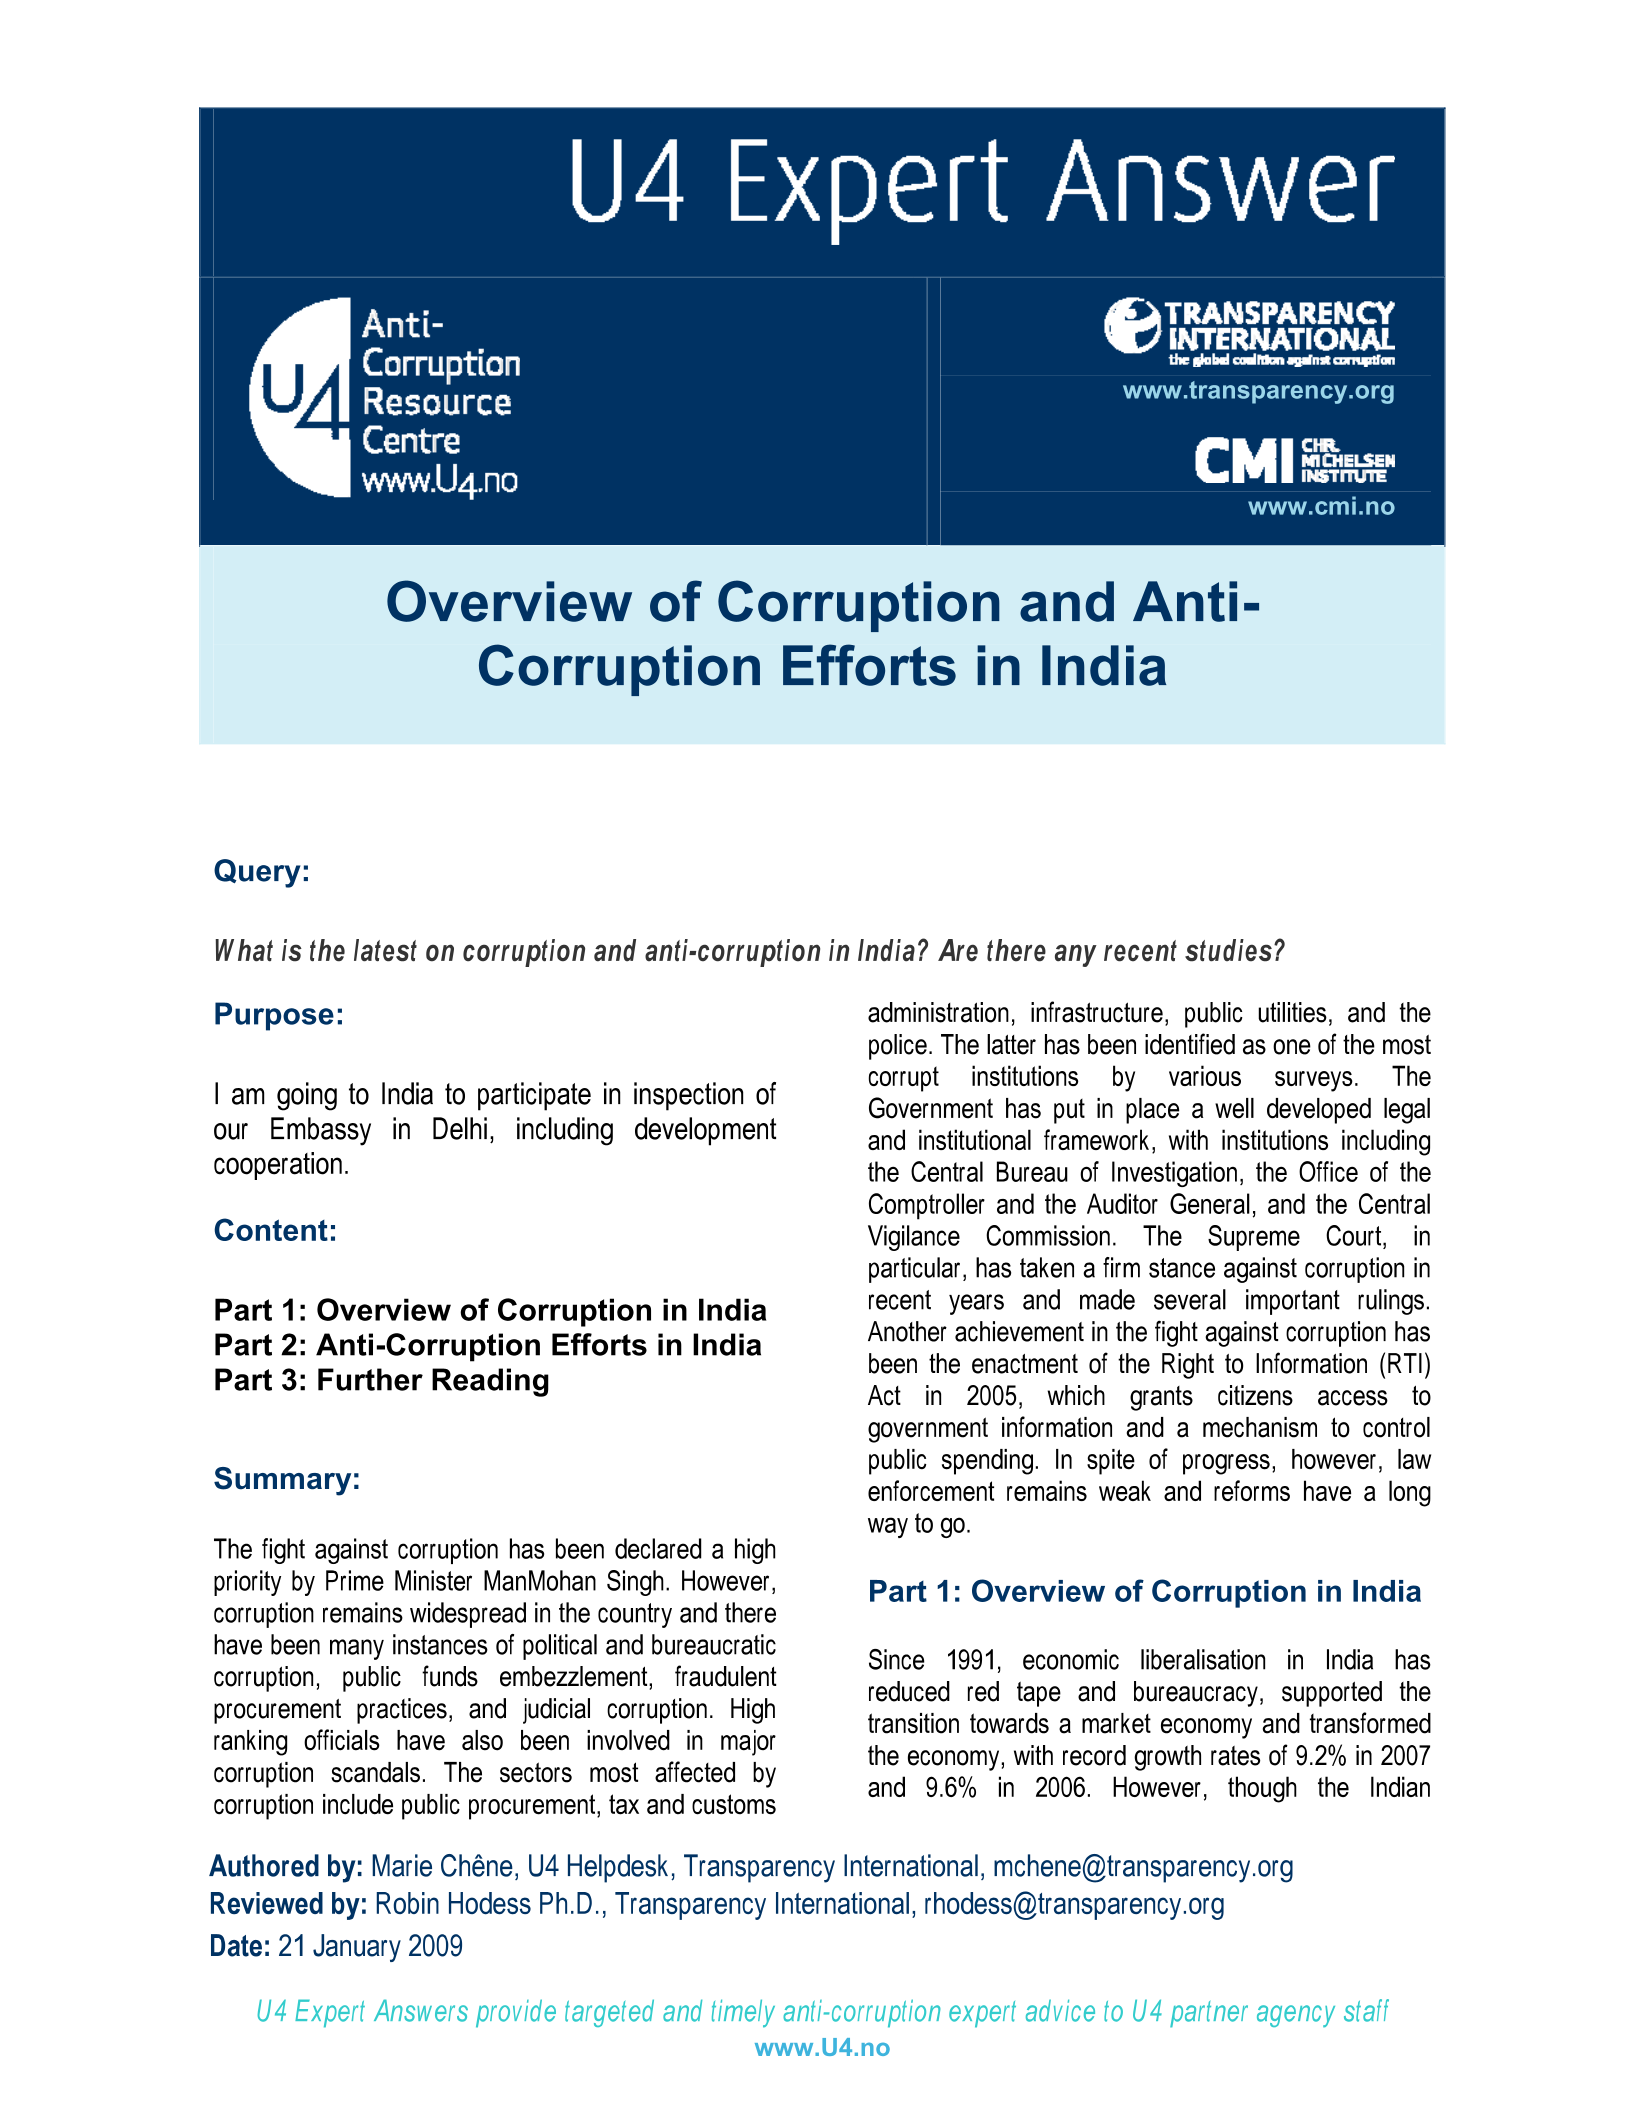 Overview of corruption and anti-corruption efforts in India